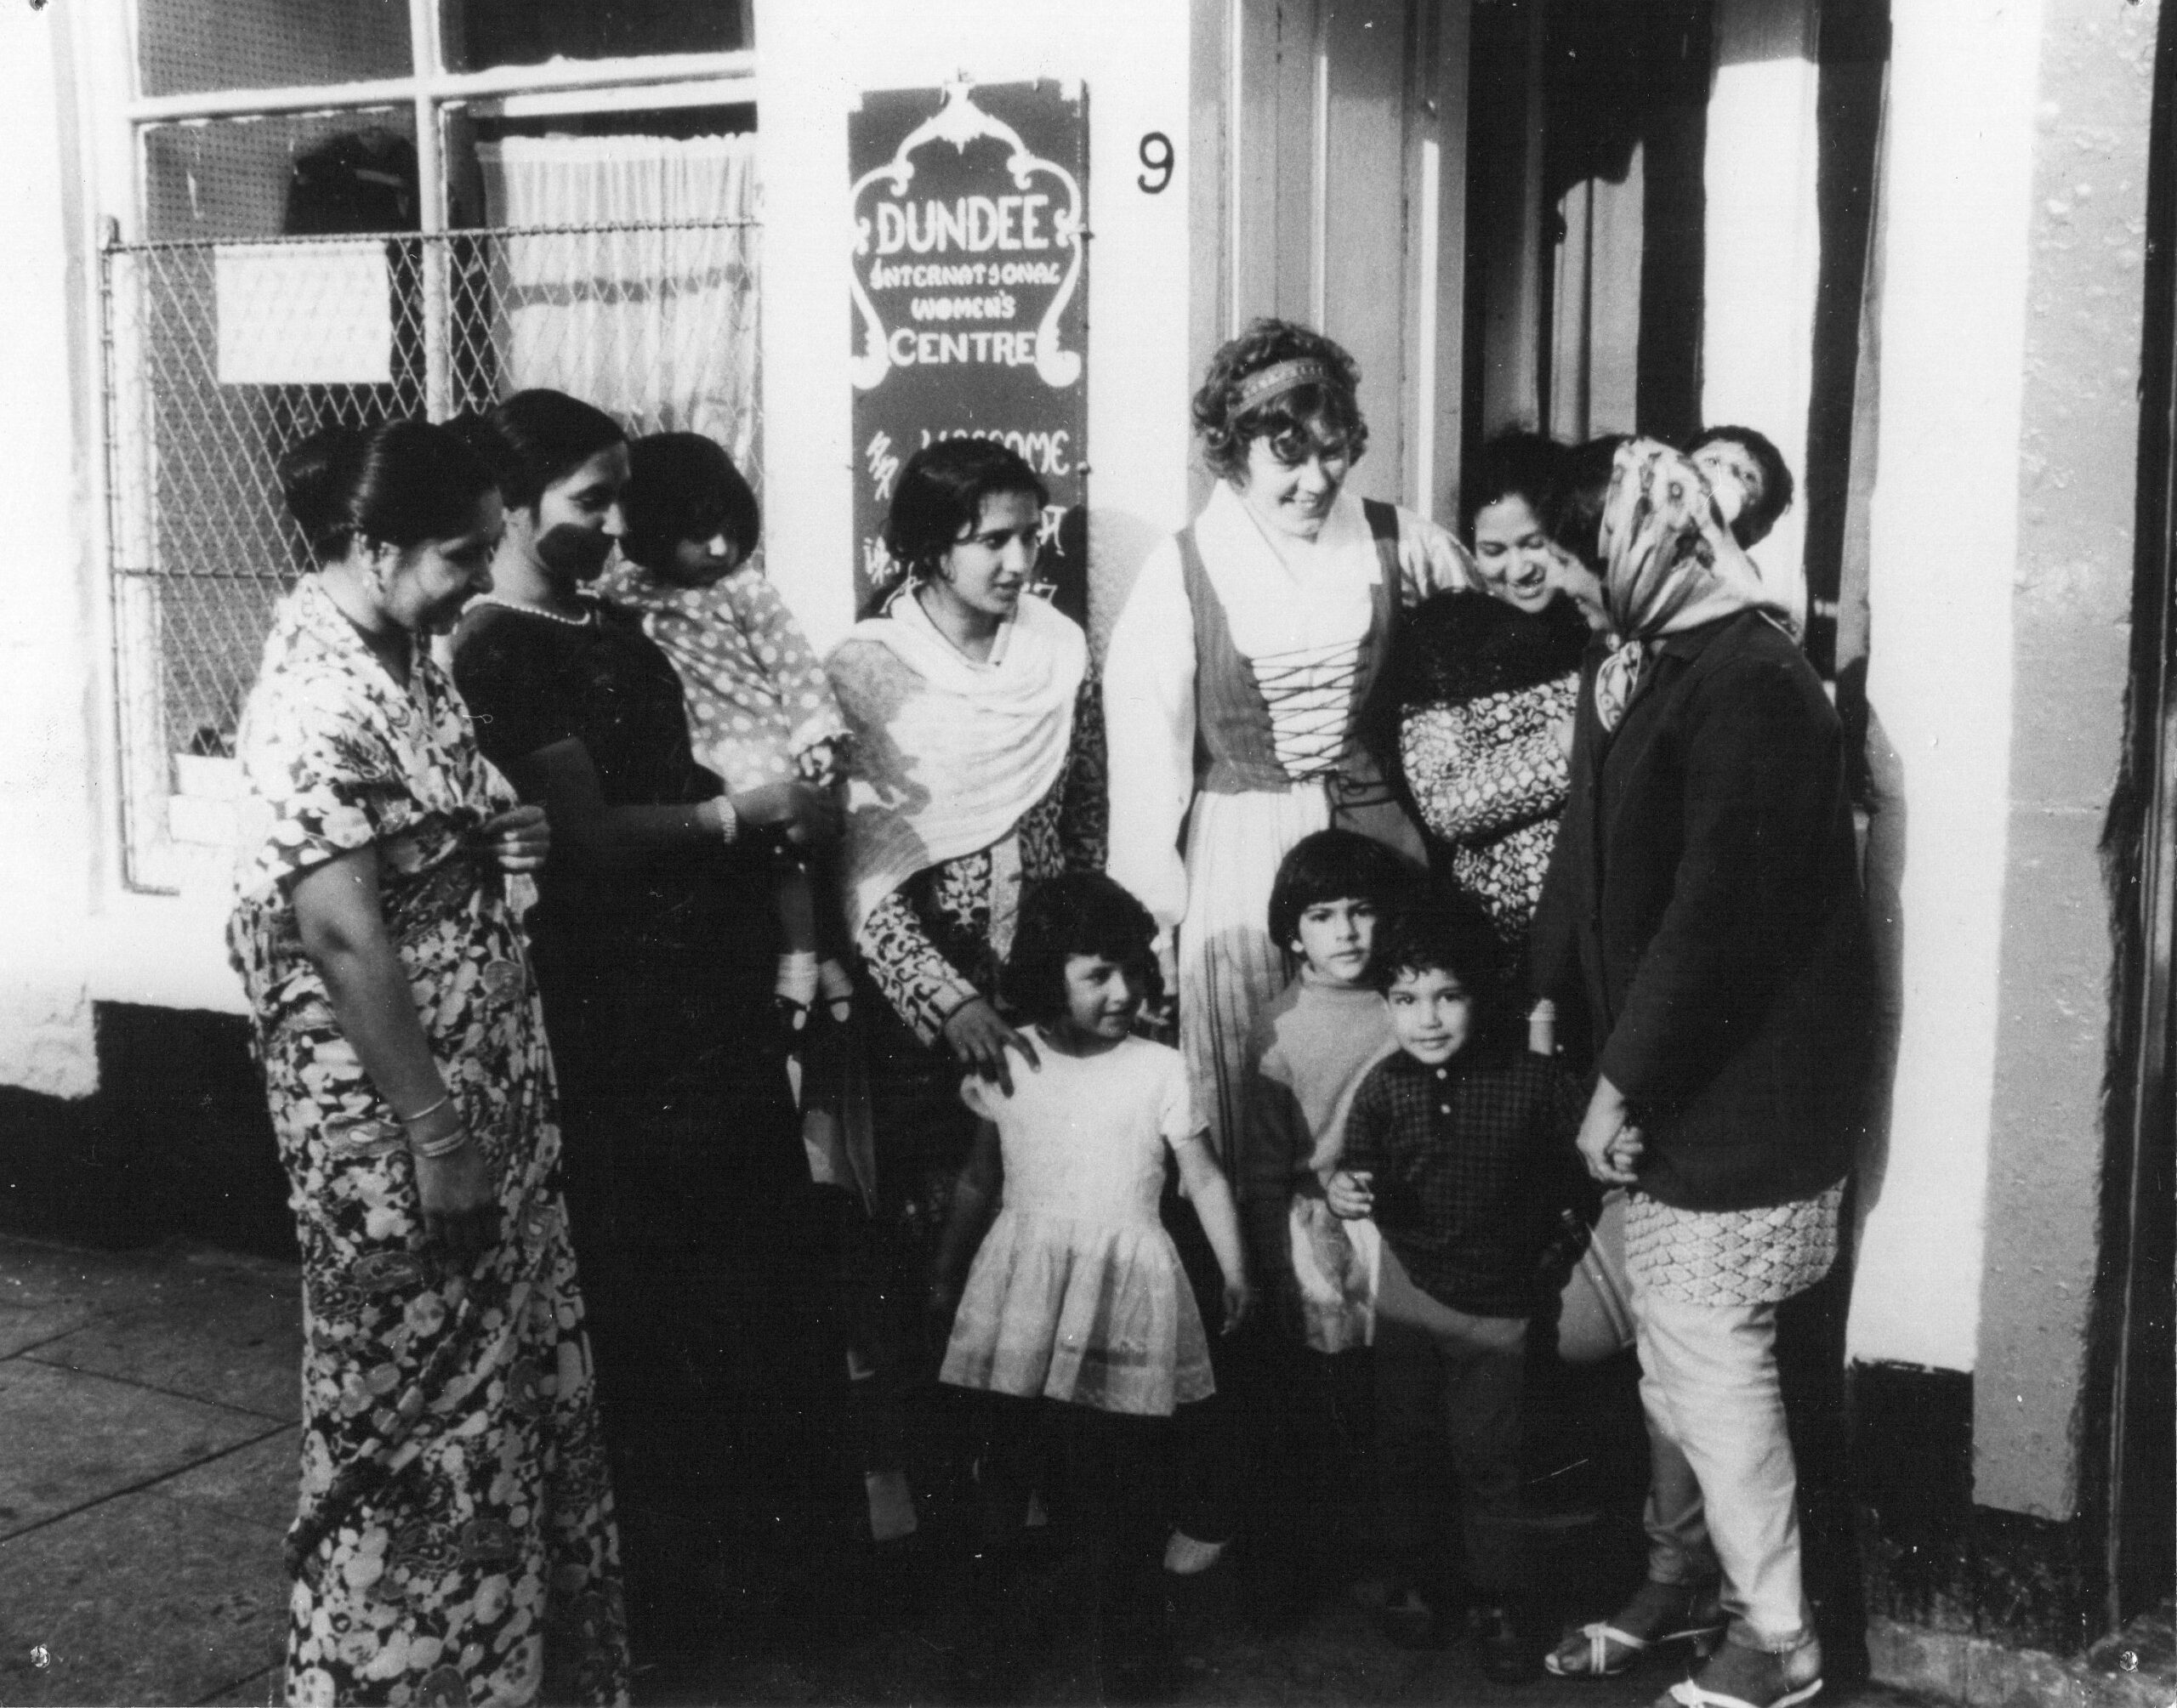 A black and white image of a group of women and children standing in front of the Dundee International Women's Centre